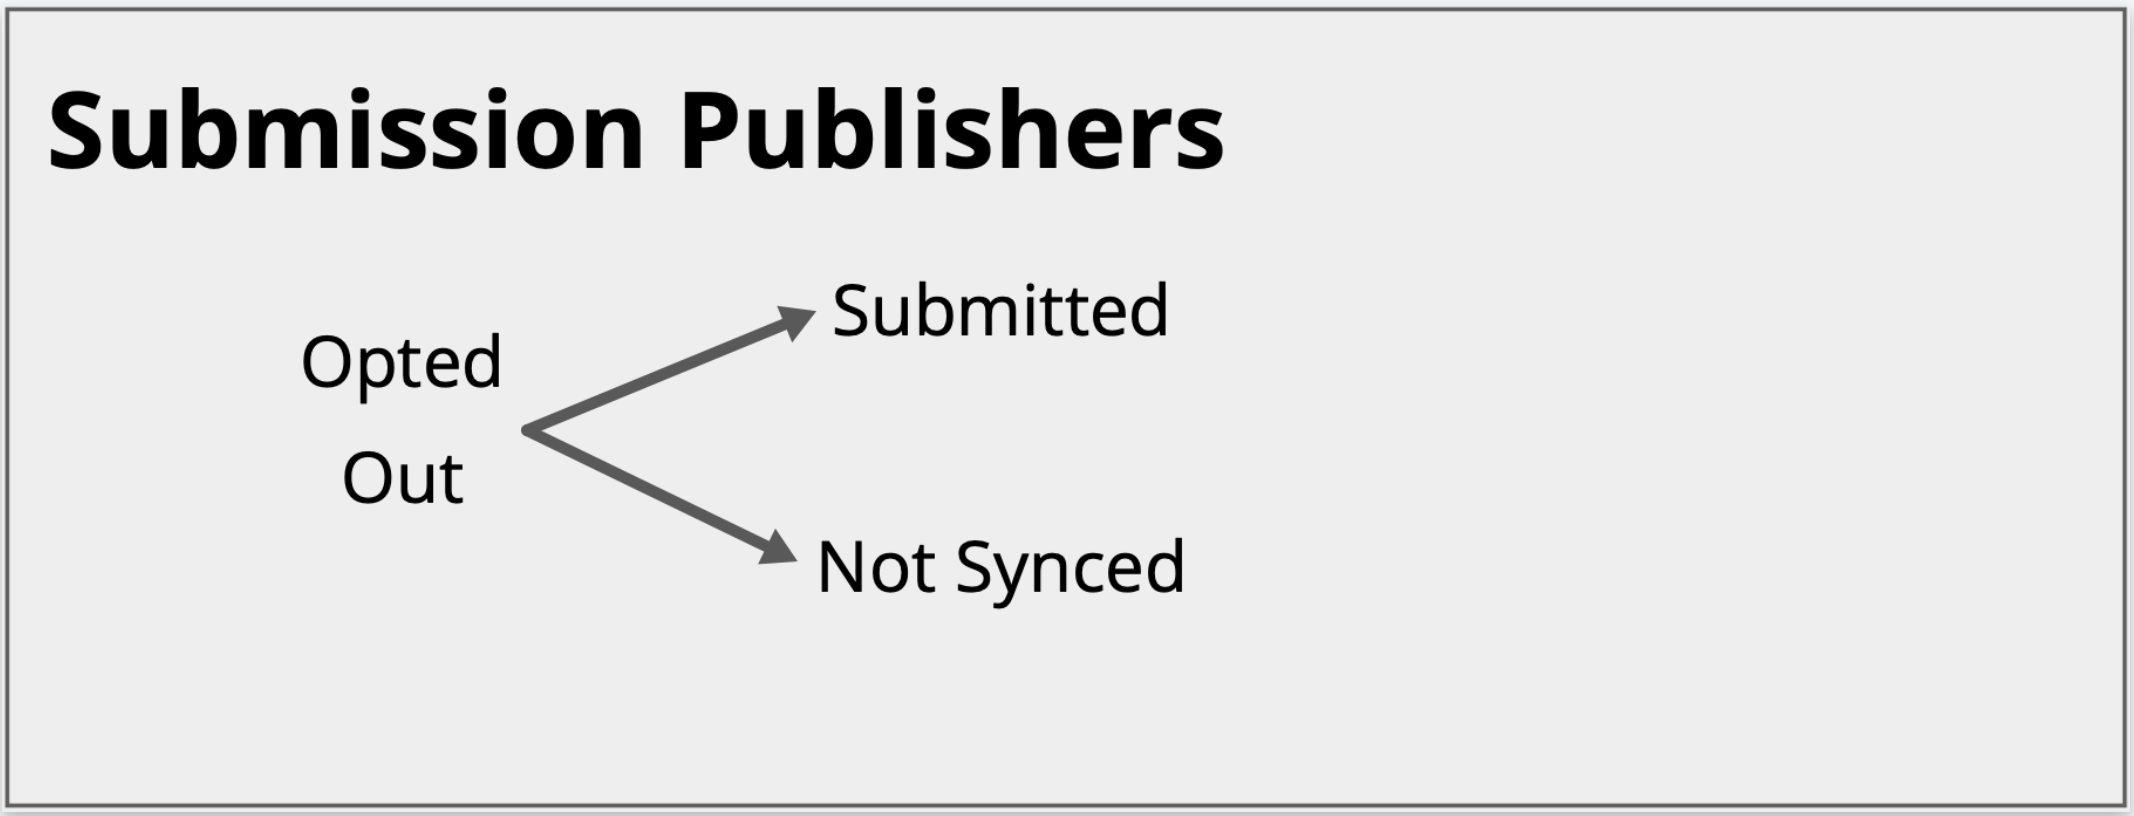 diagram of submission publisher life cycle